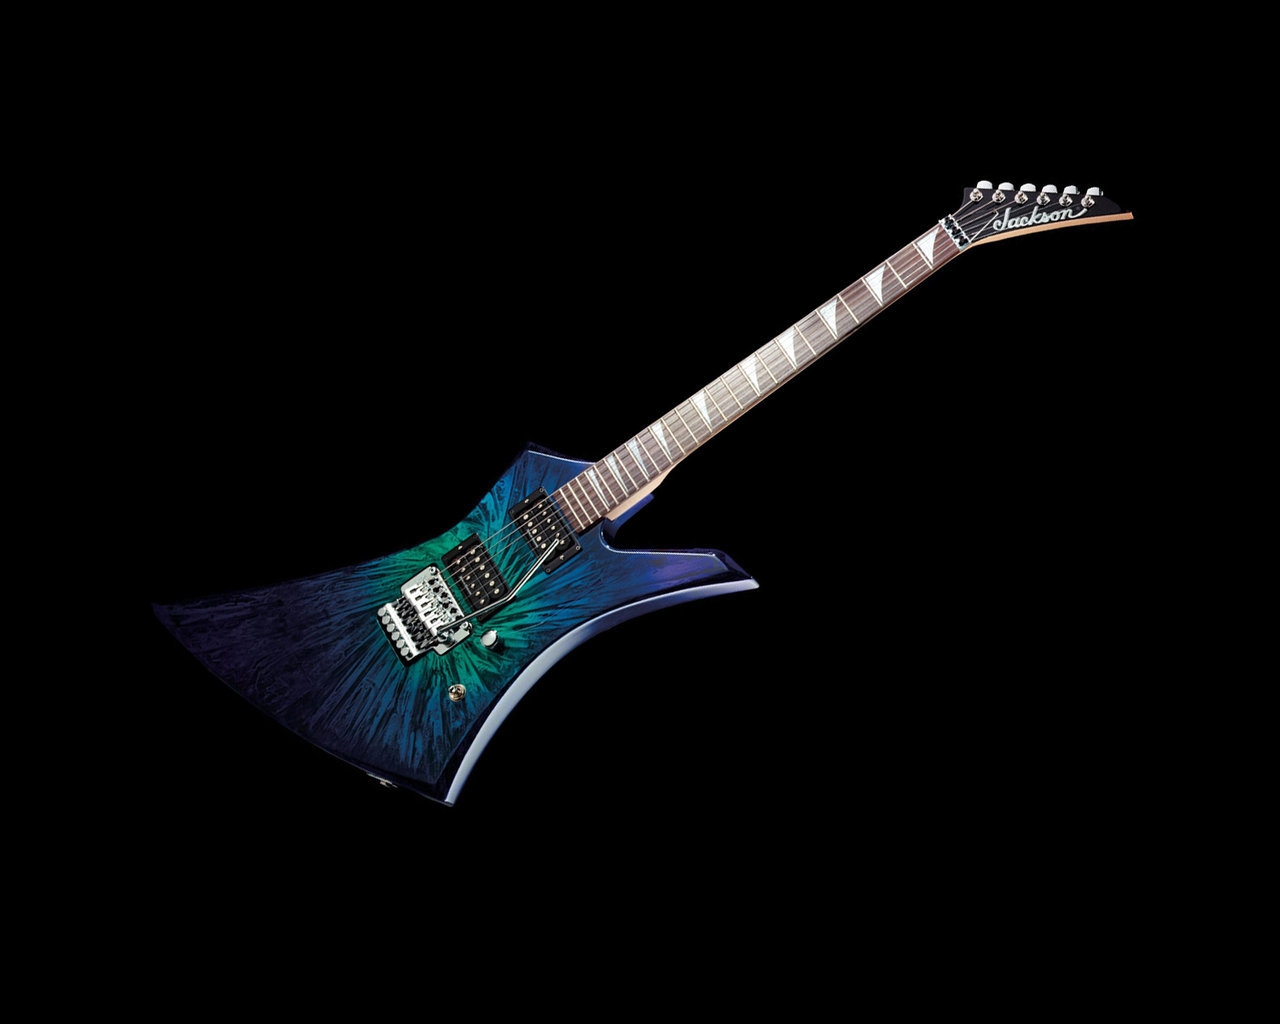 Colourful Guitar for 1280 x 1024 resolution